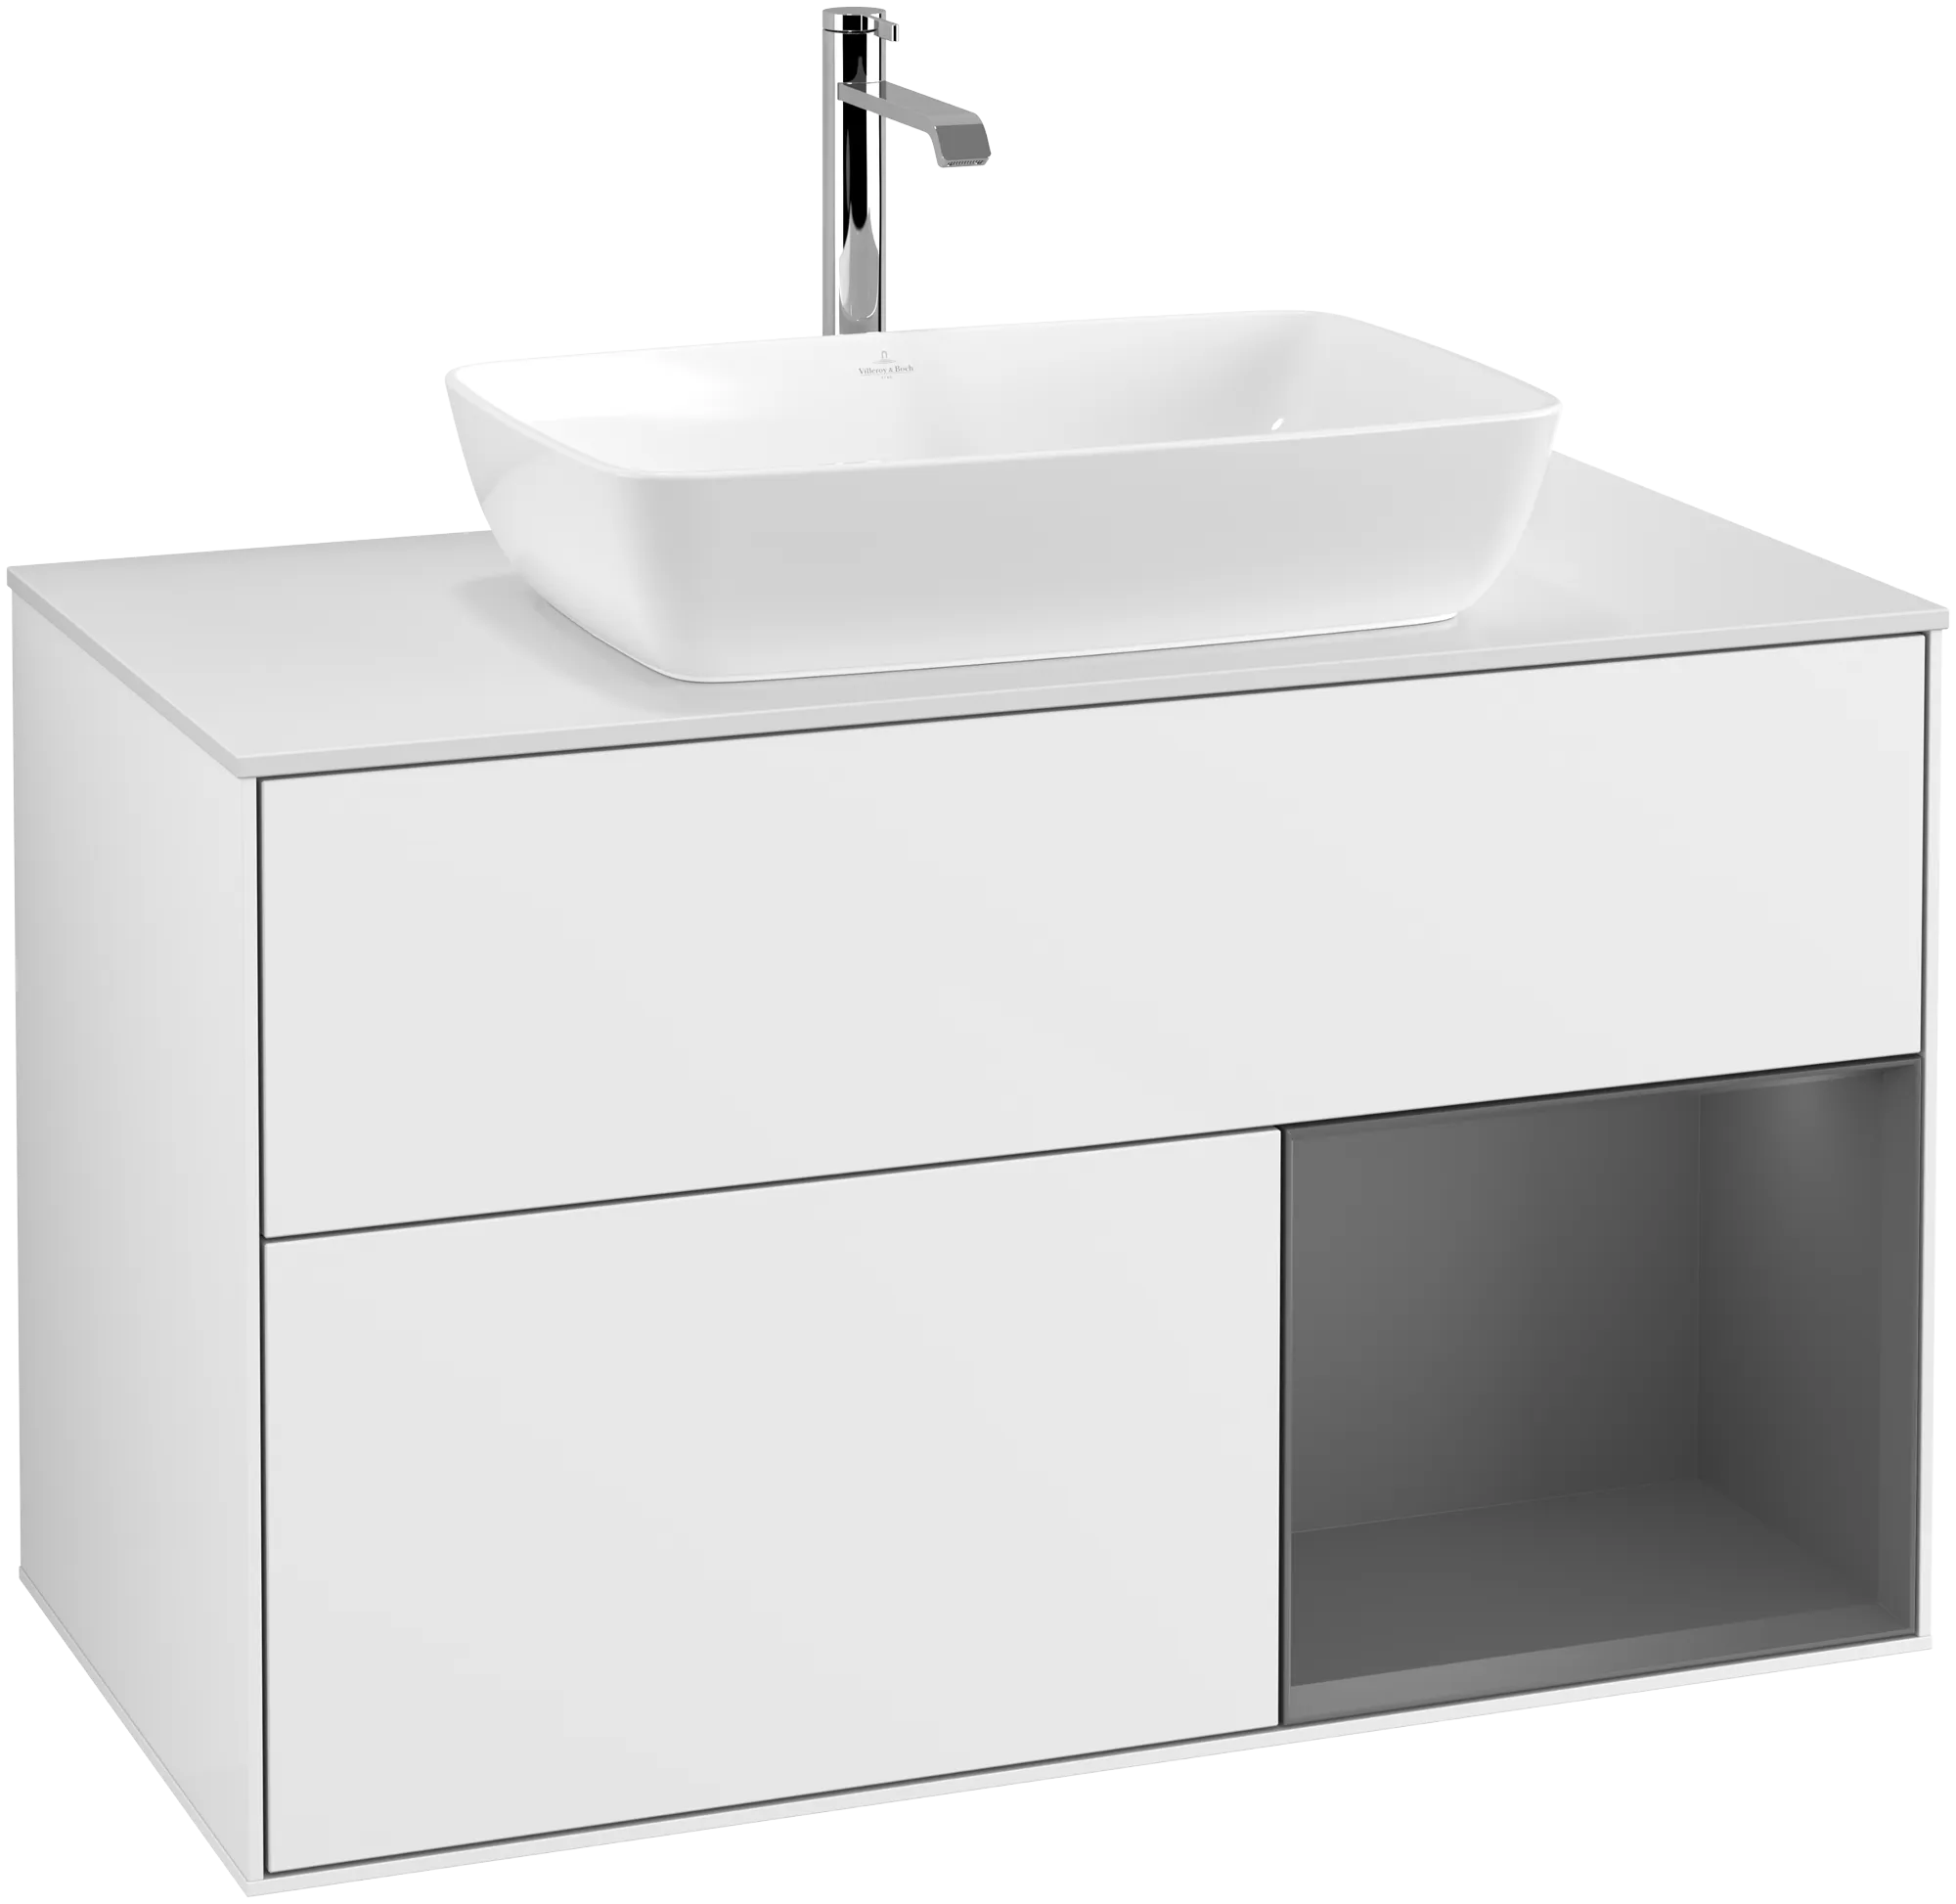 VILLEROY BOCH Finion Vanity unit, with lighting, 2 pull-out compartments, 1000 x 603 x 501 mm, Glossy White Lacquer / Anthracite Matt Lacquer / Glass White Matt #G781GKGF resmi